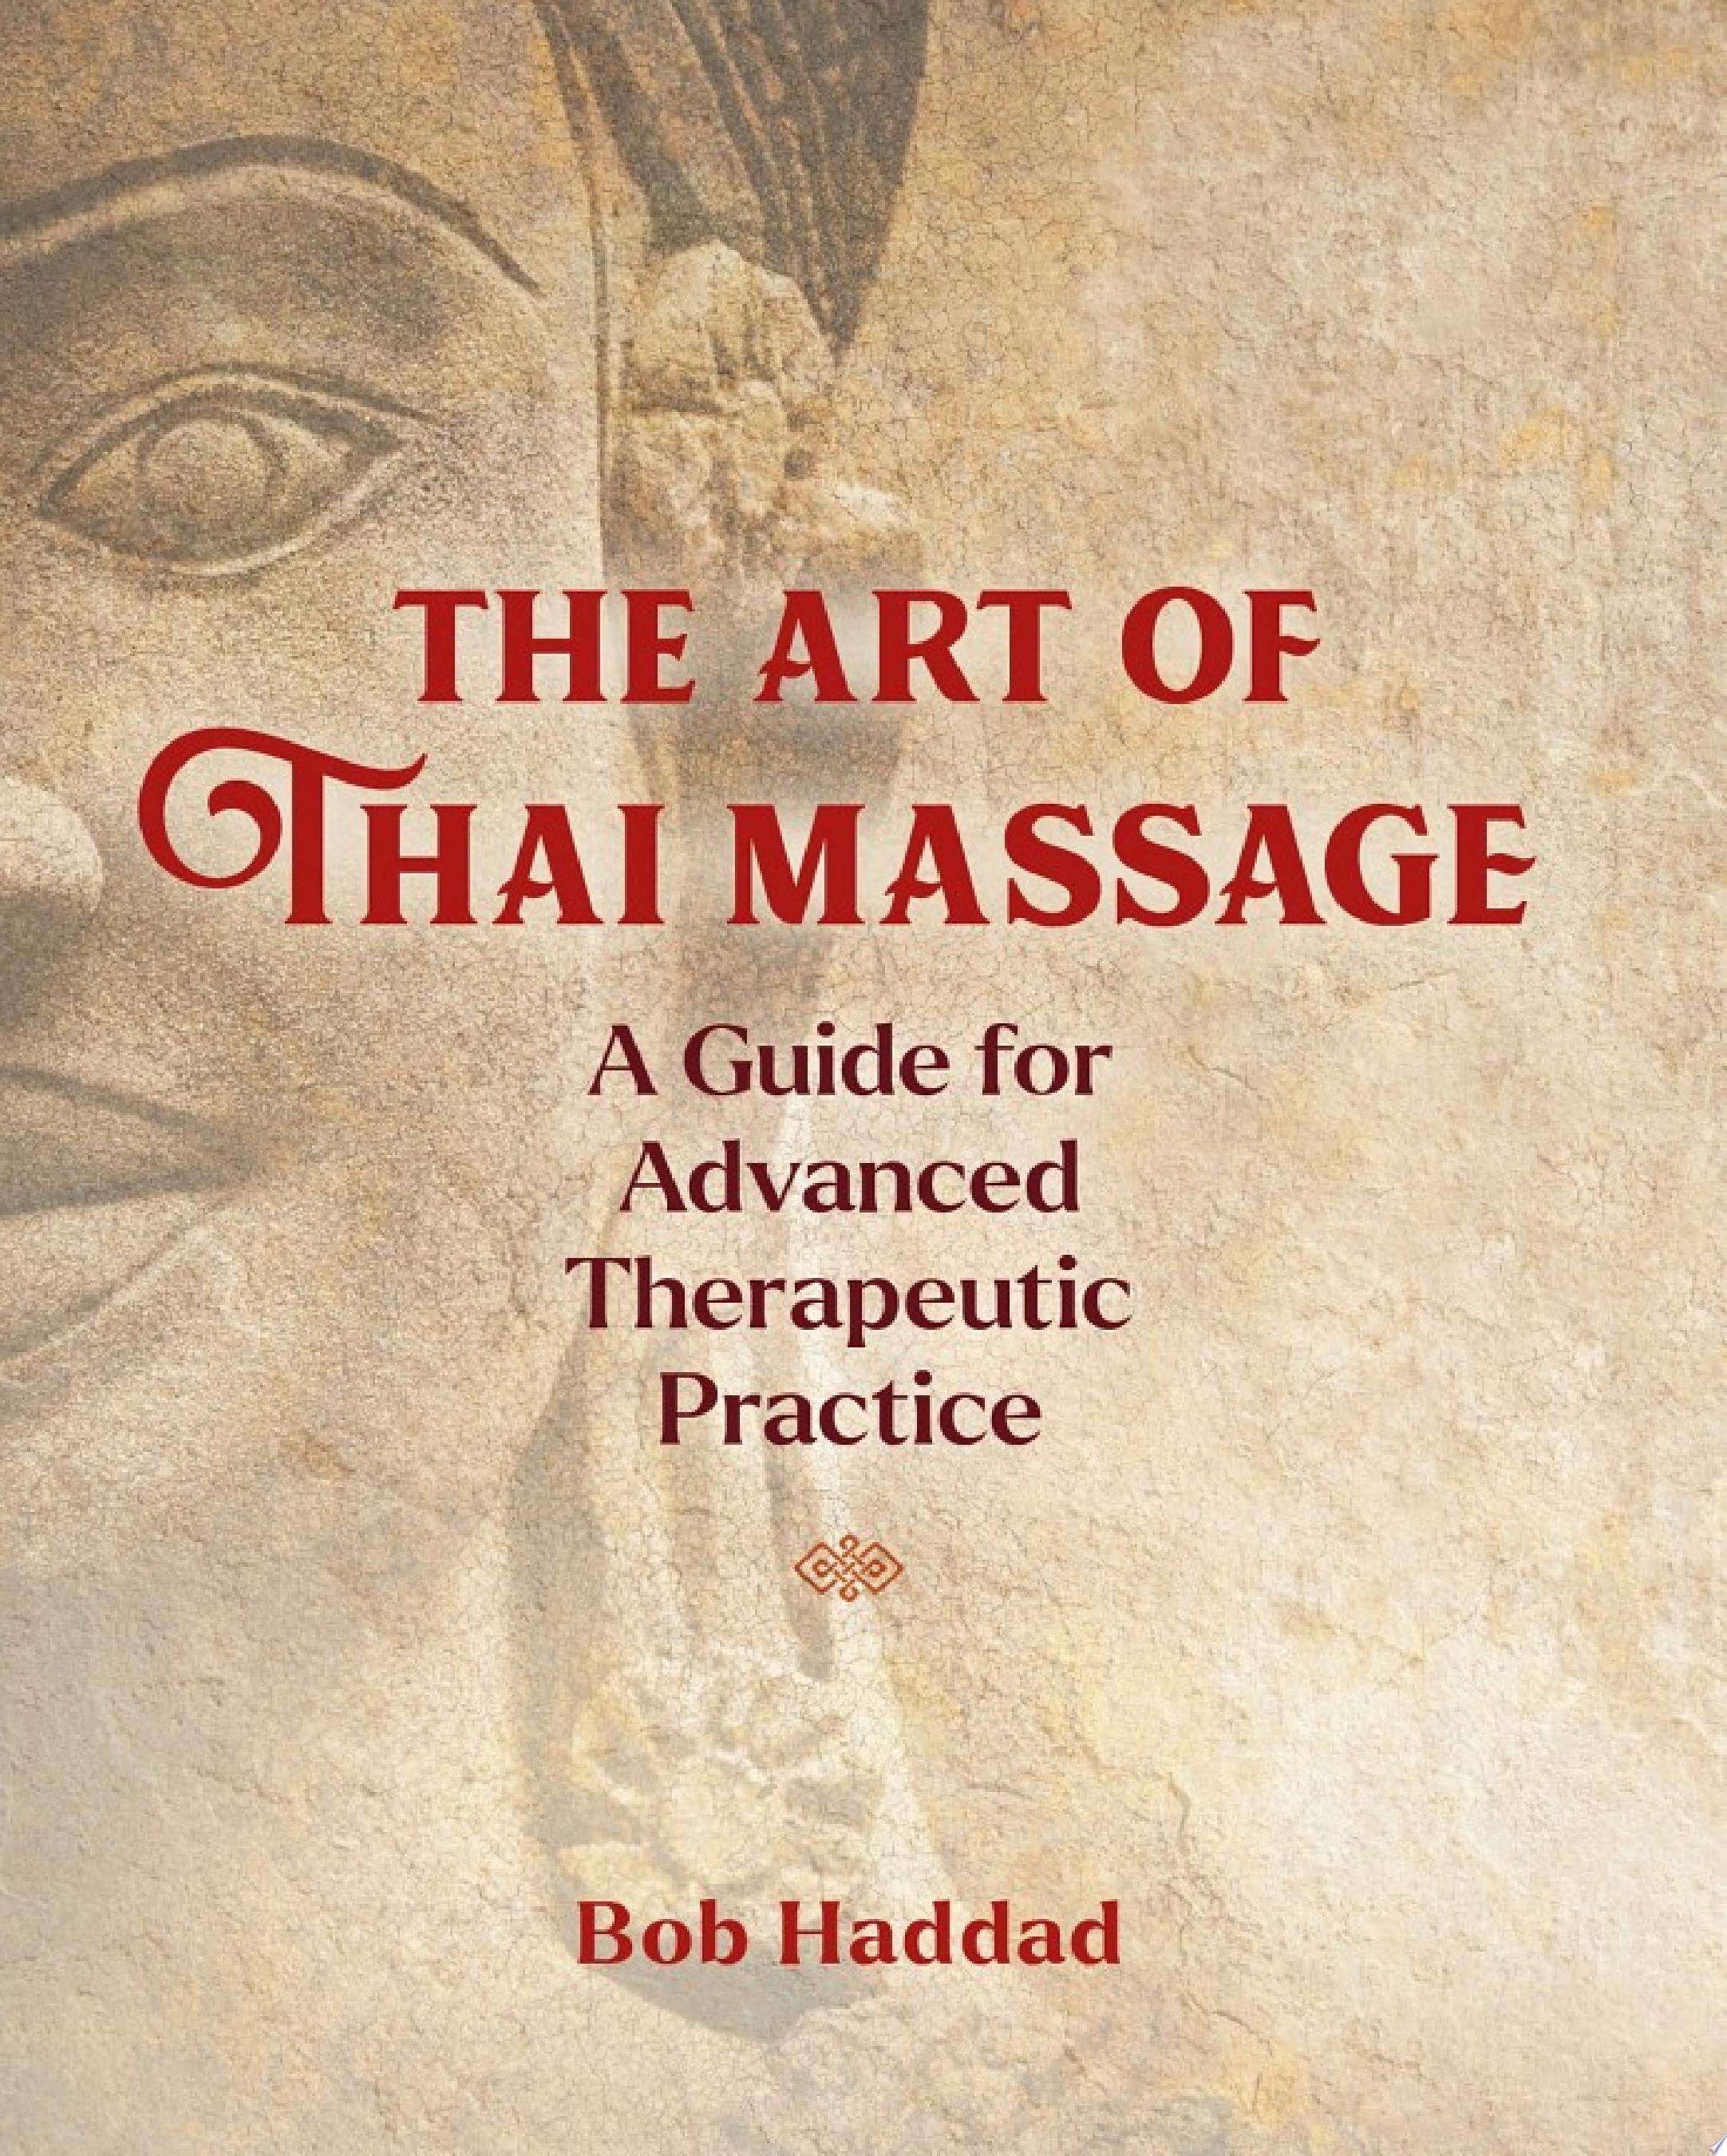 Image for "The Art of Thai Massage"